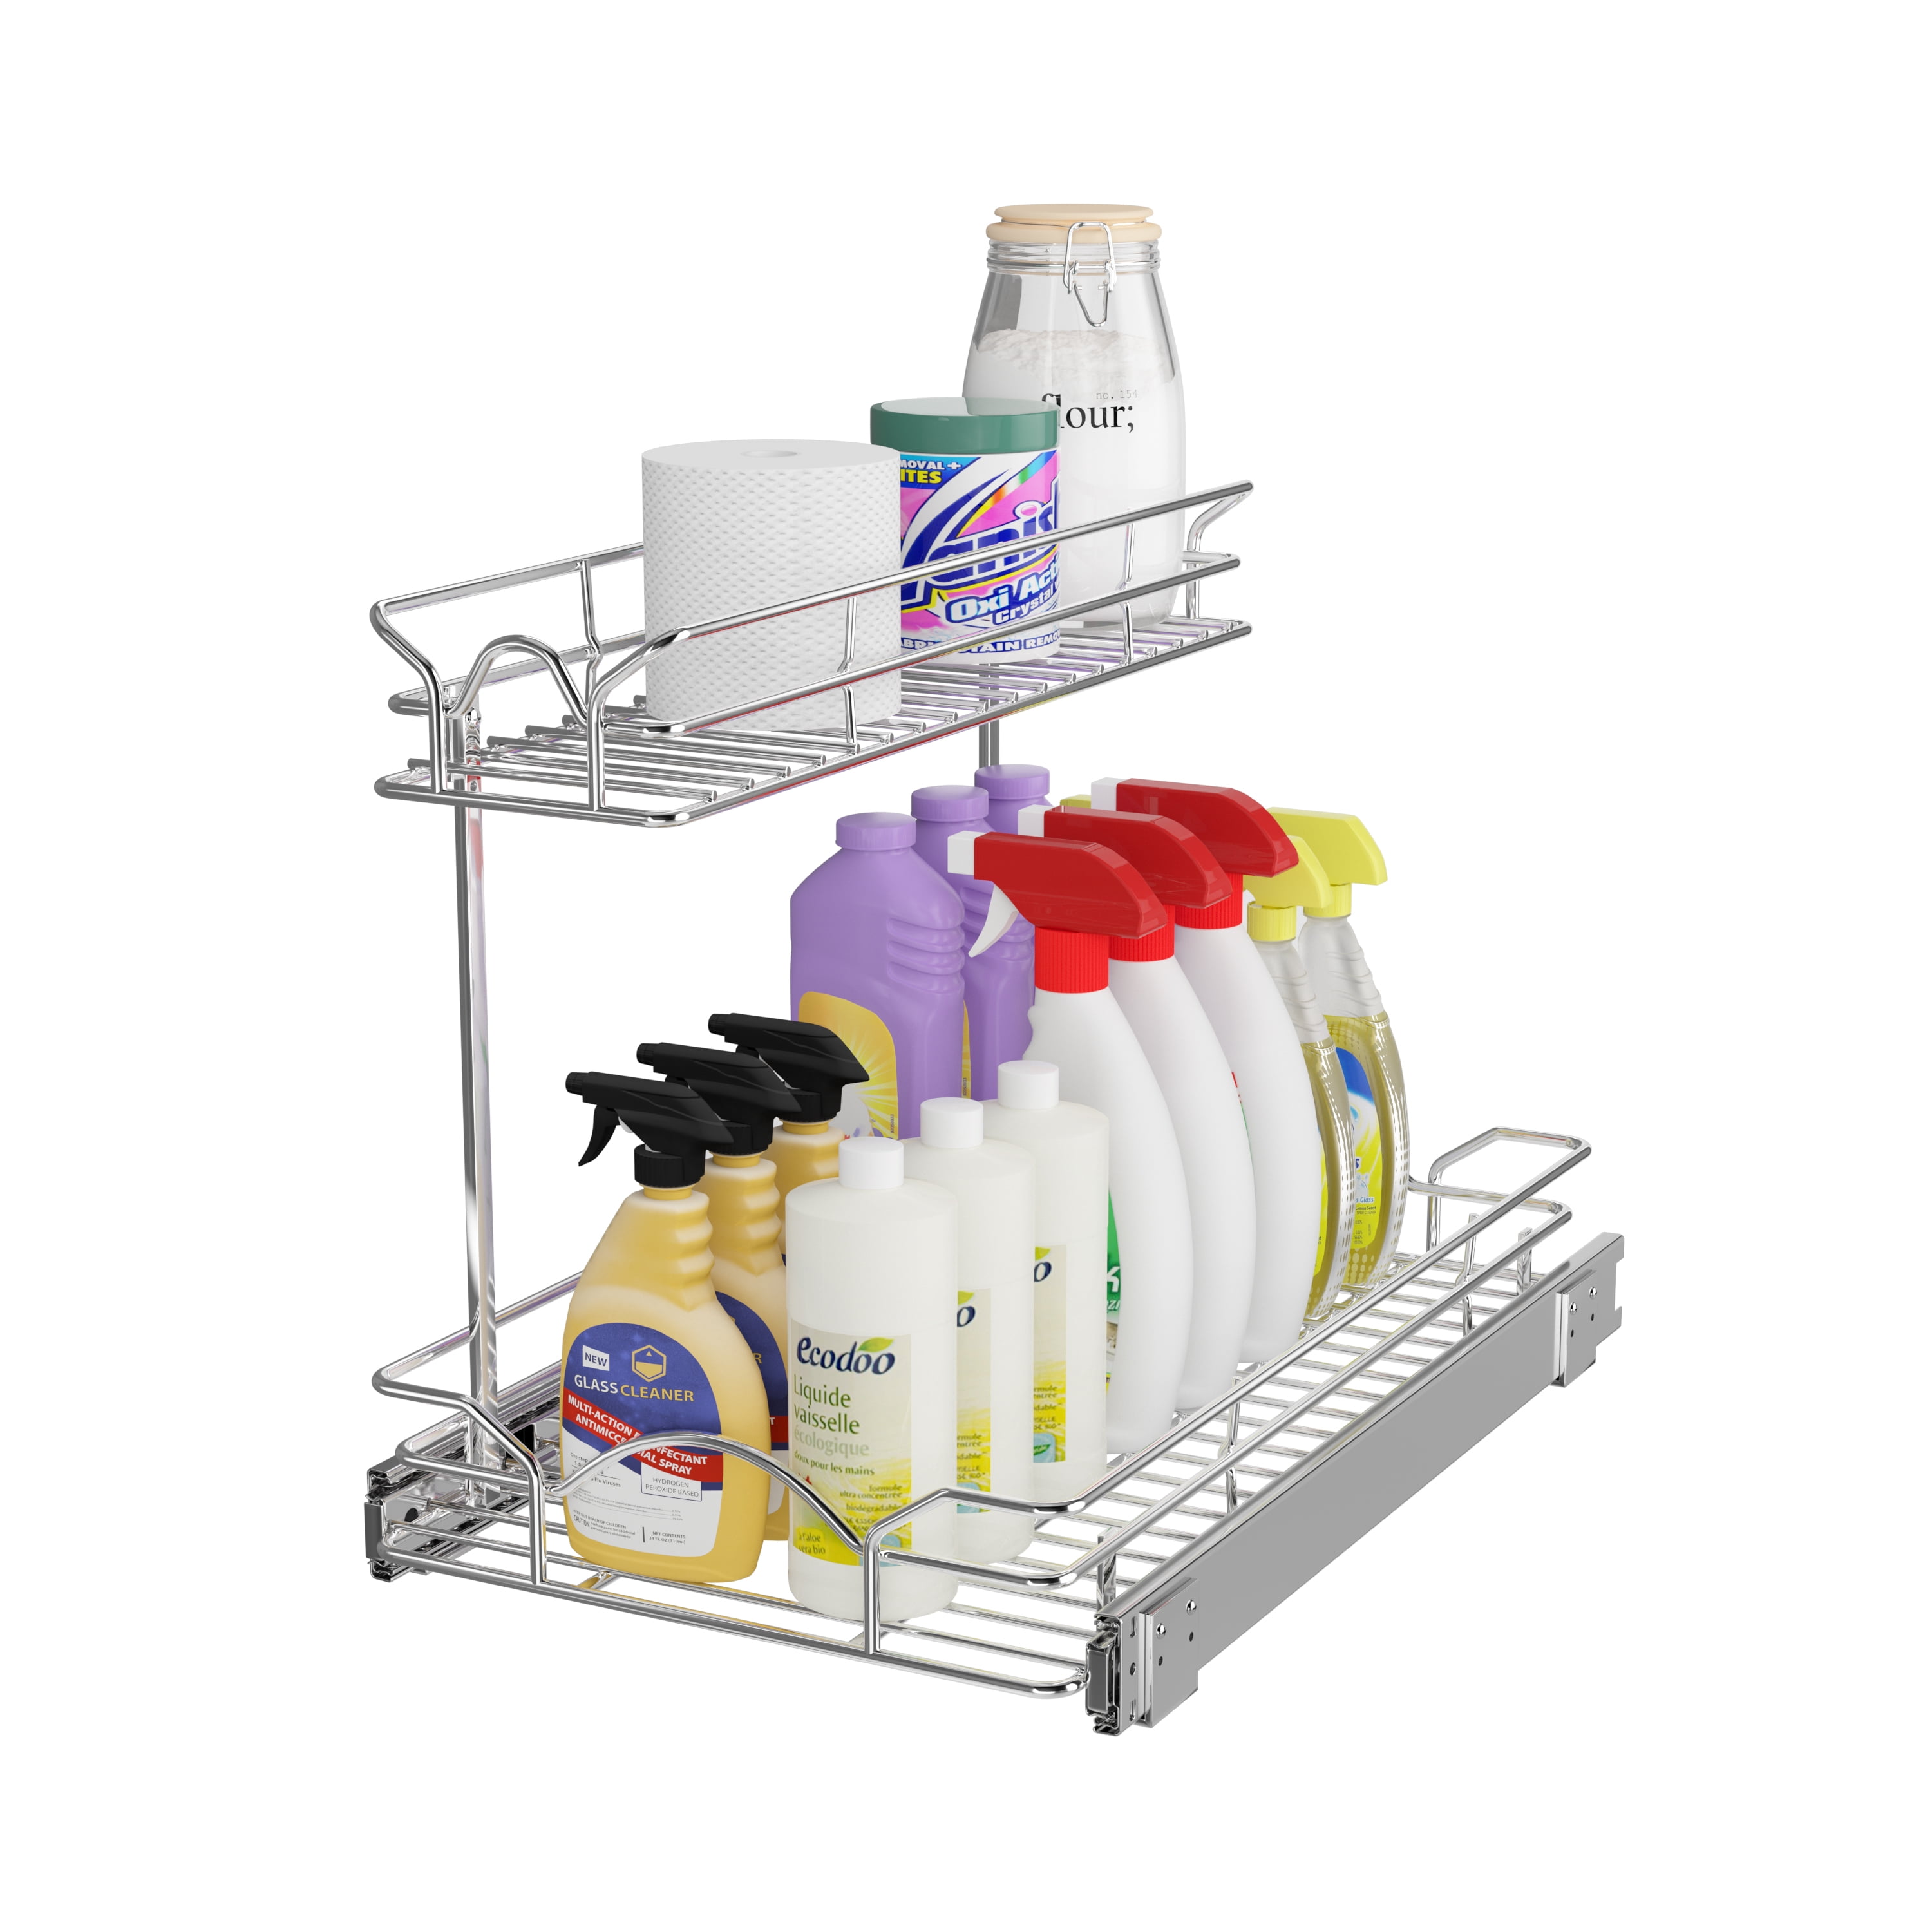 LYNK PROFESSIONAL® Slide Out Under Sink Cabinet Organizer - Pull Out Two  Tier Sliding Shelf - 11.5 in. wide x 21 inch deep - Chrome 